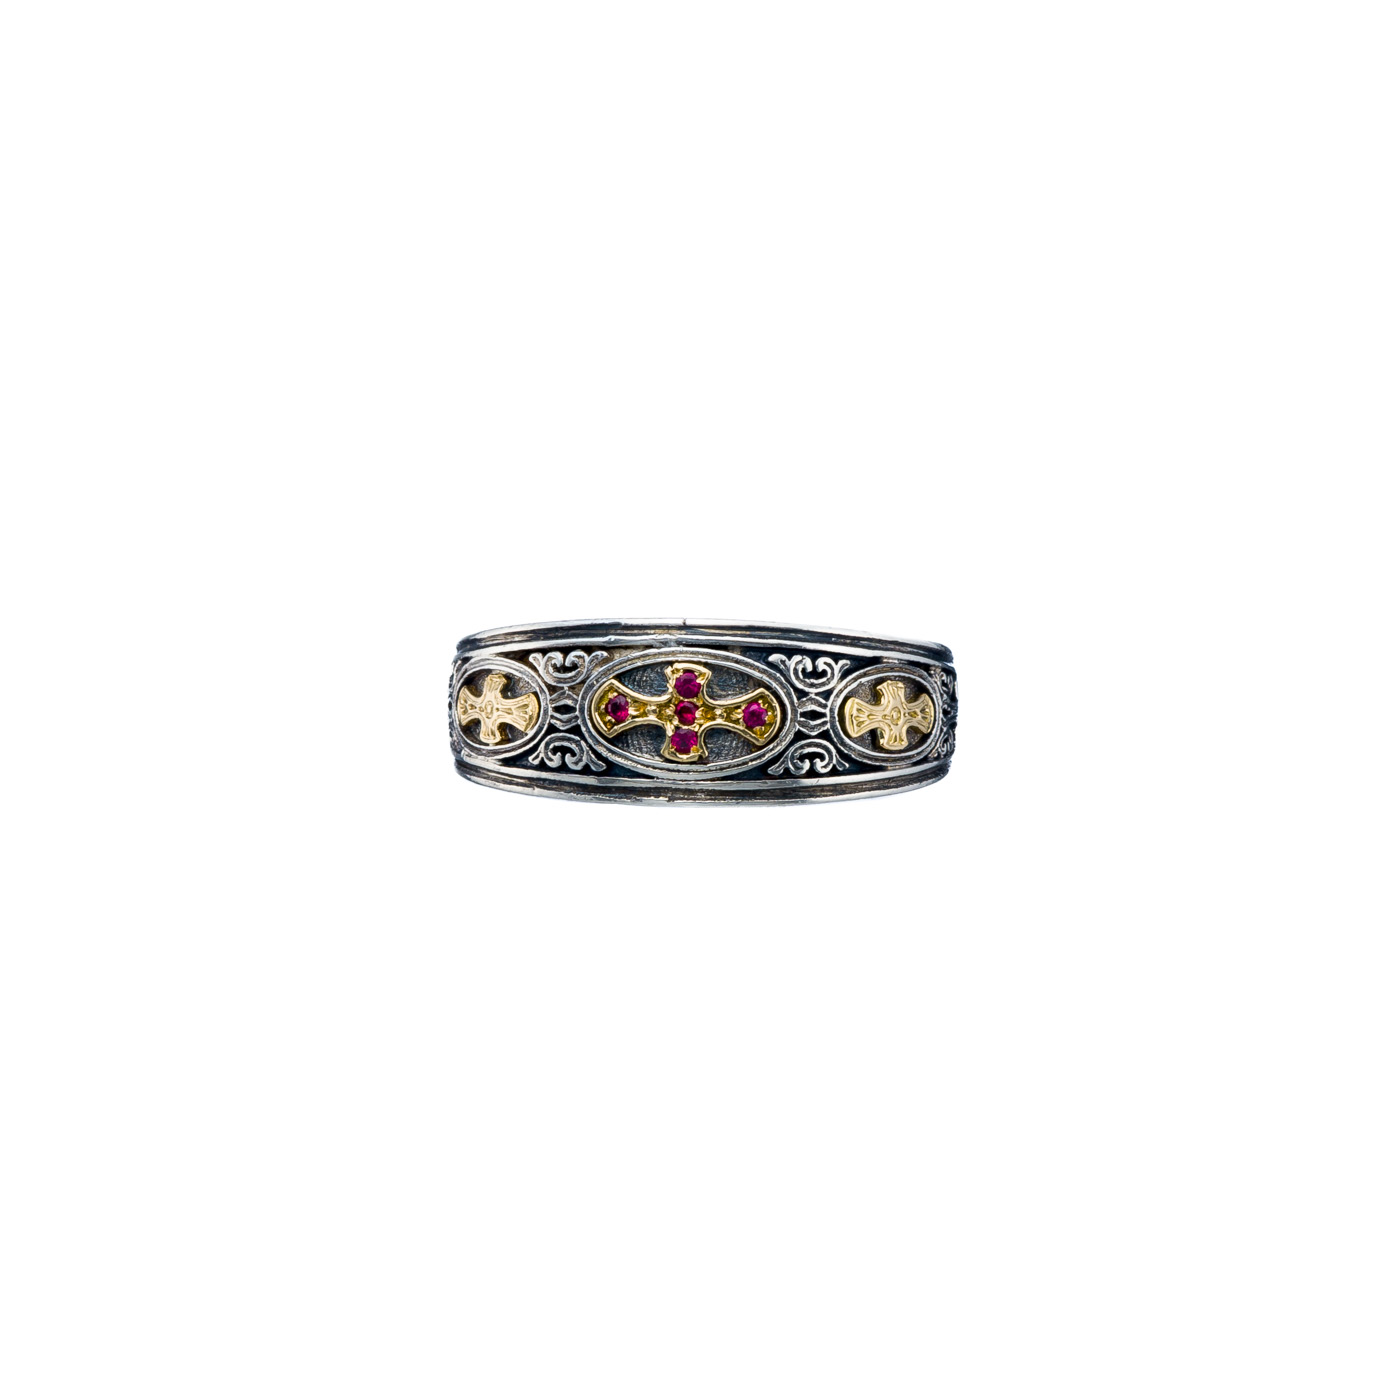 Patmos Ring in 18K Gold and Sterling silver with rubies